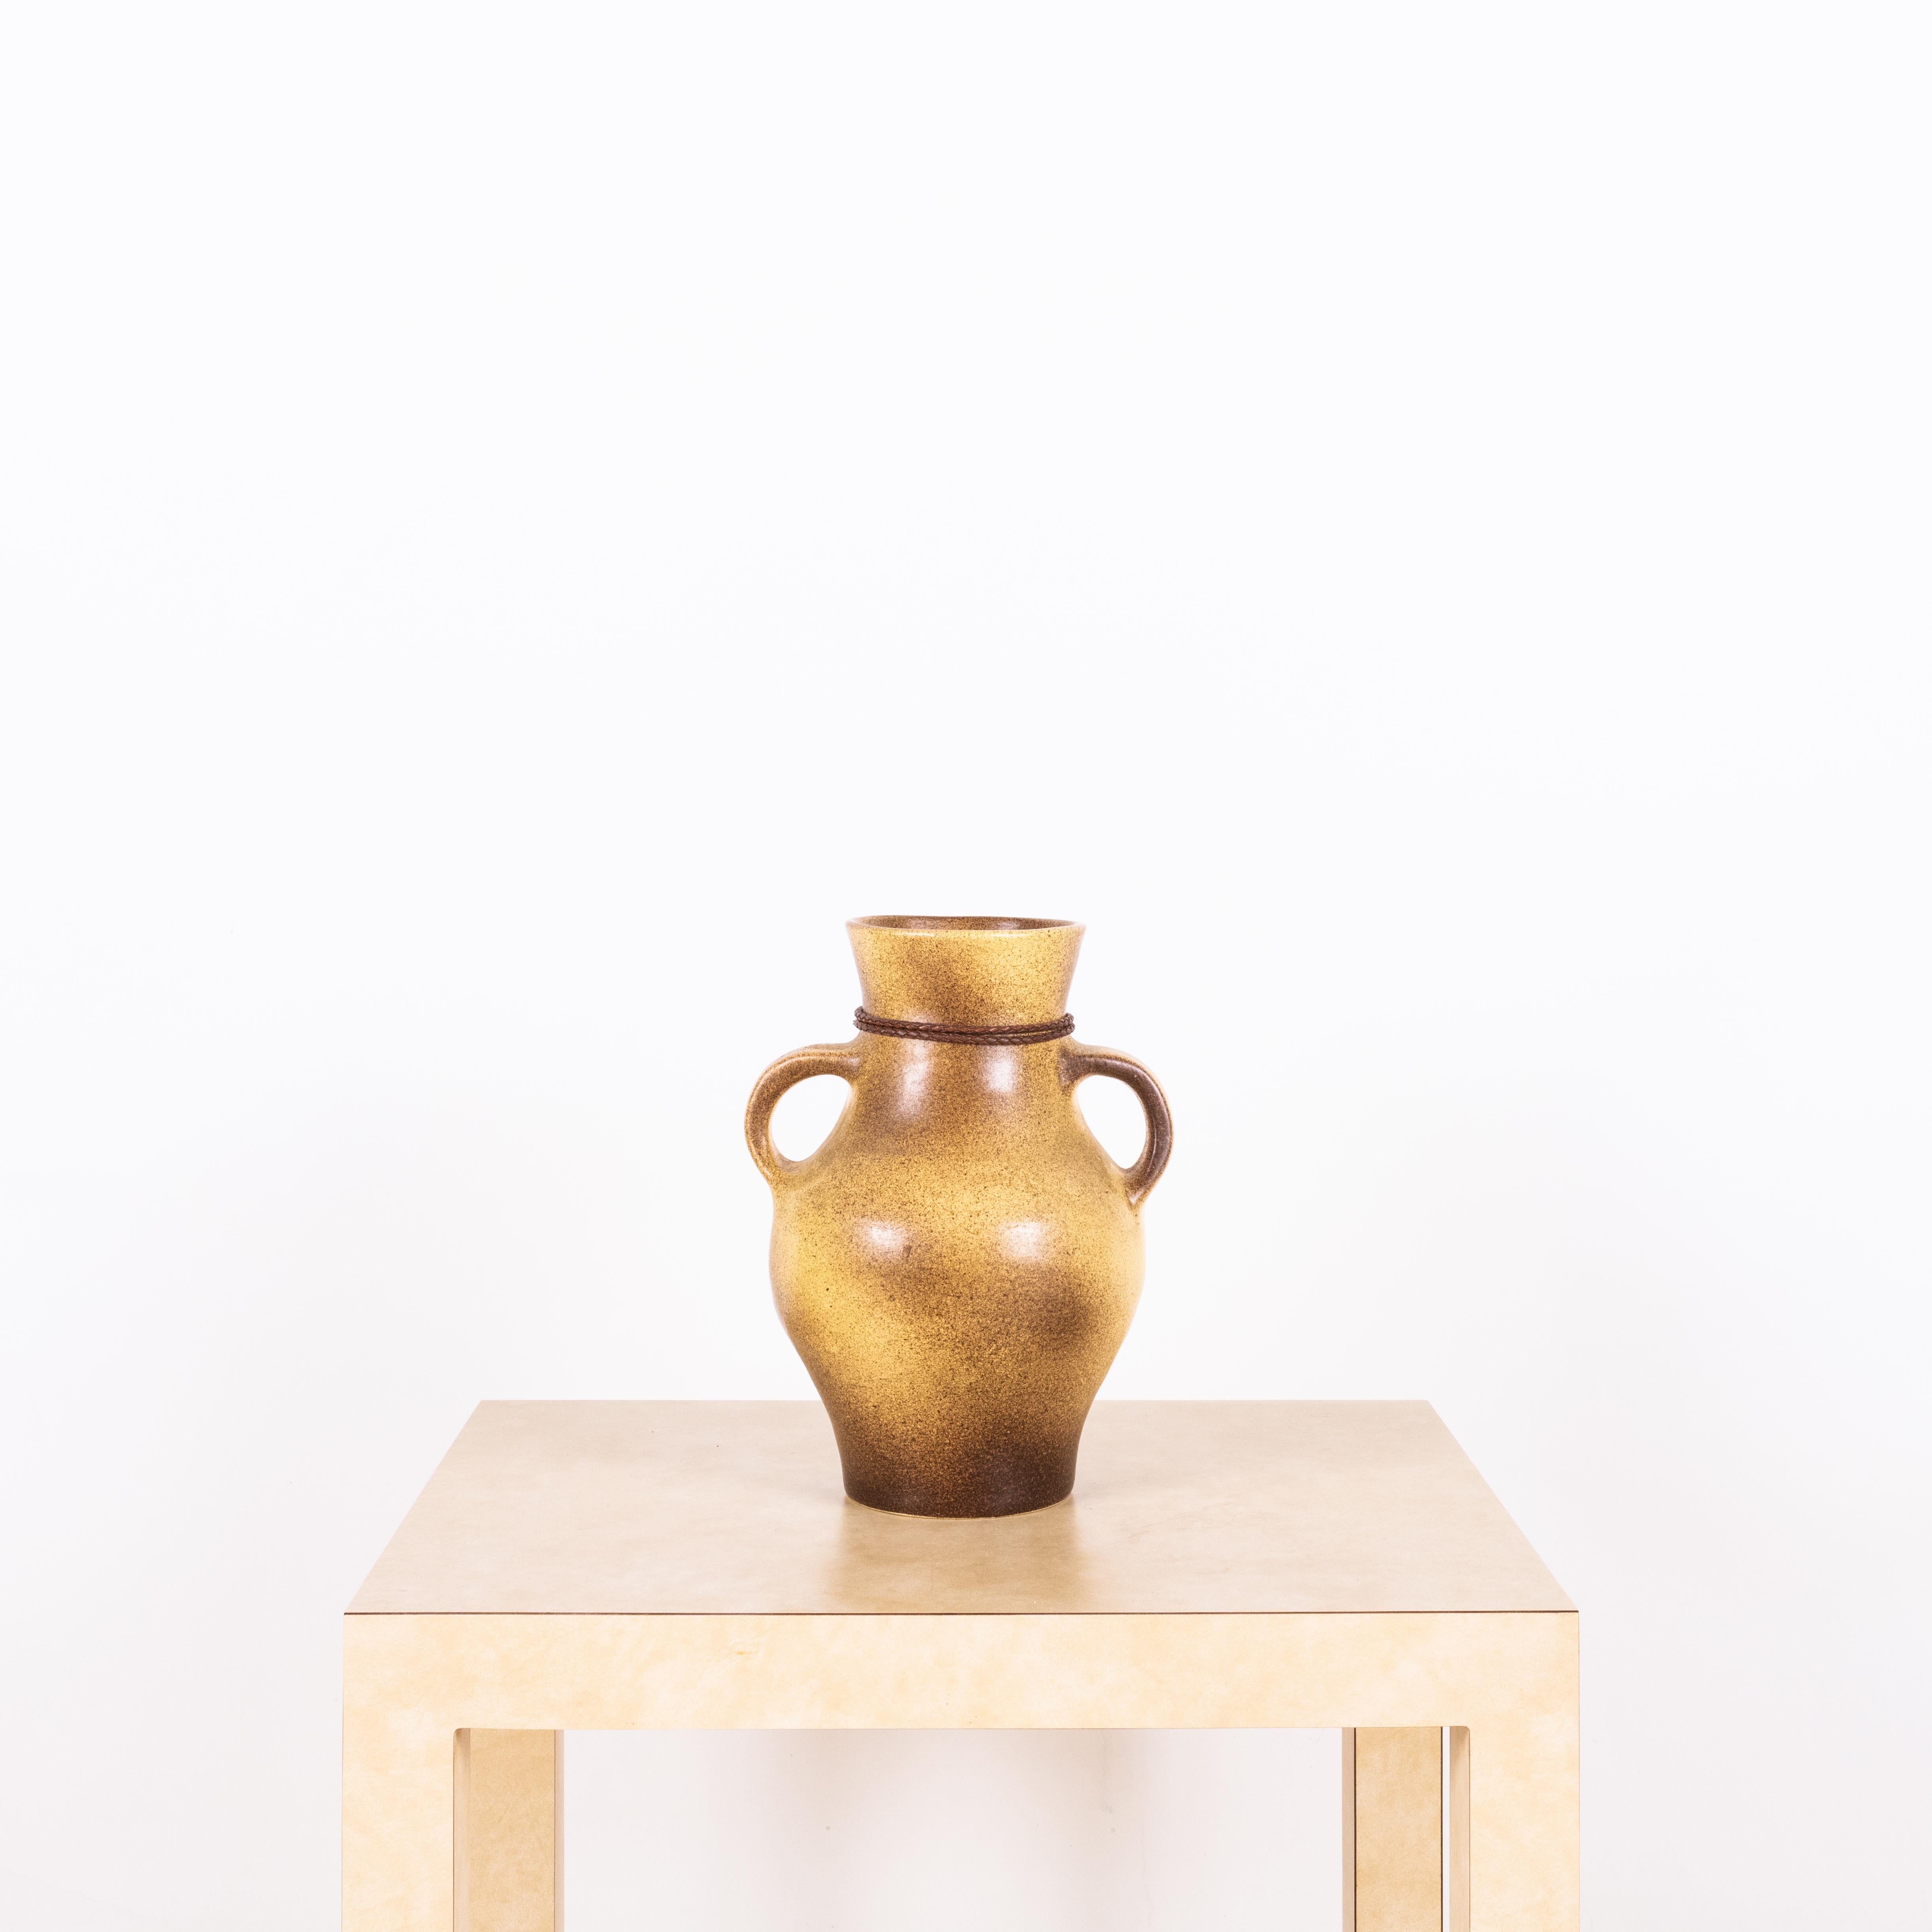 Important French 60's glazed ceramic vase by Max Idlas (1932-2019). Signed.

Born in Marseille in 1932, the self-taught Idlas opened his first pottery workshop in Montmartre, Paris in 1954. In 1964, he moved to Brittany, setting up his ceramic and